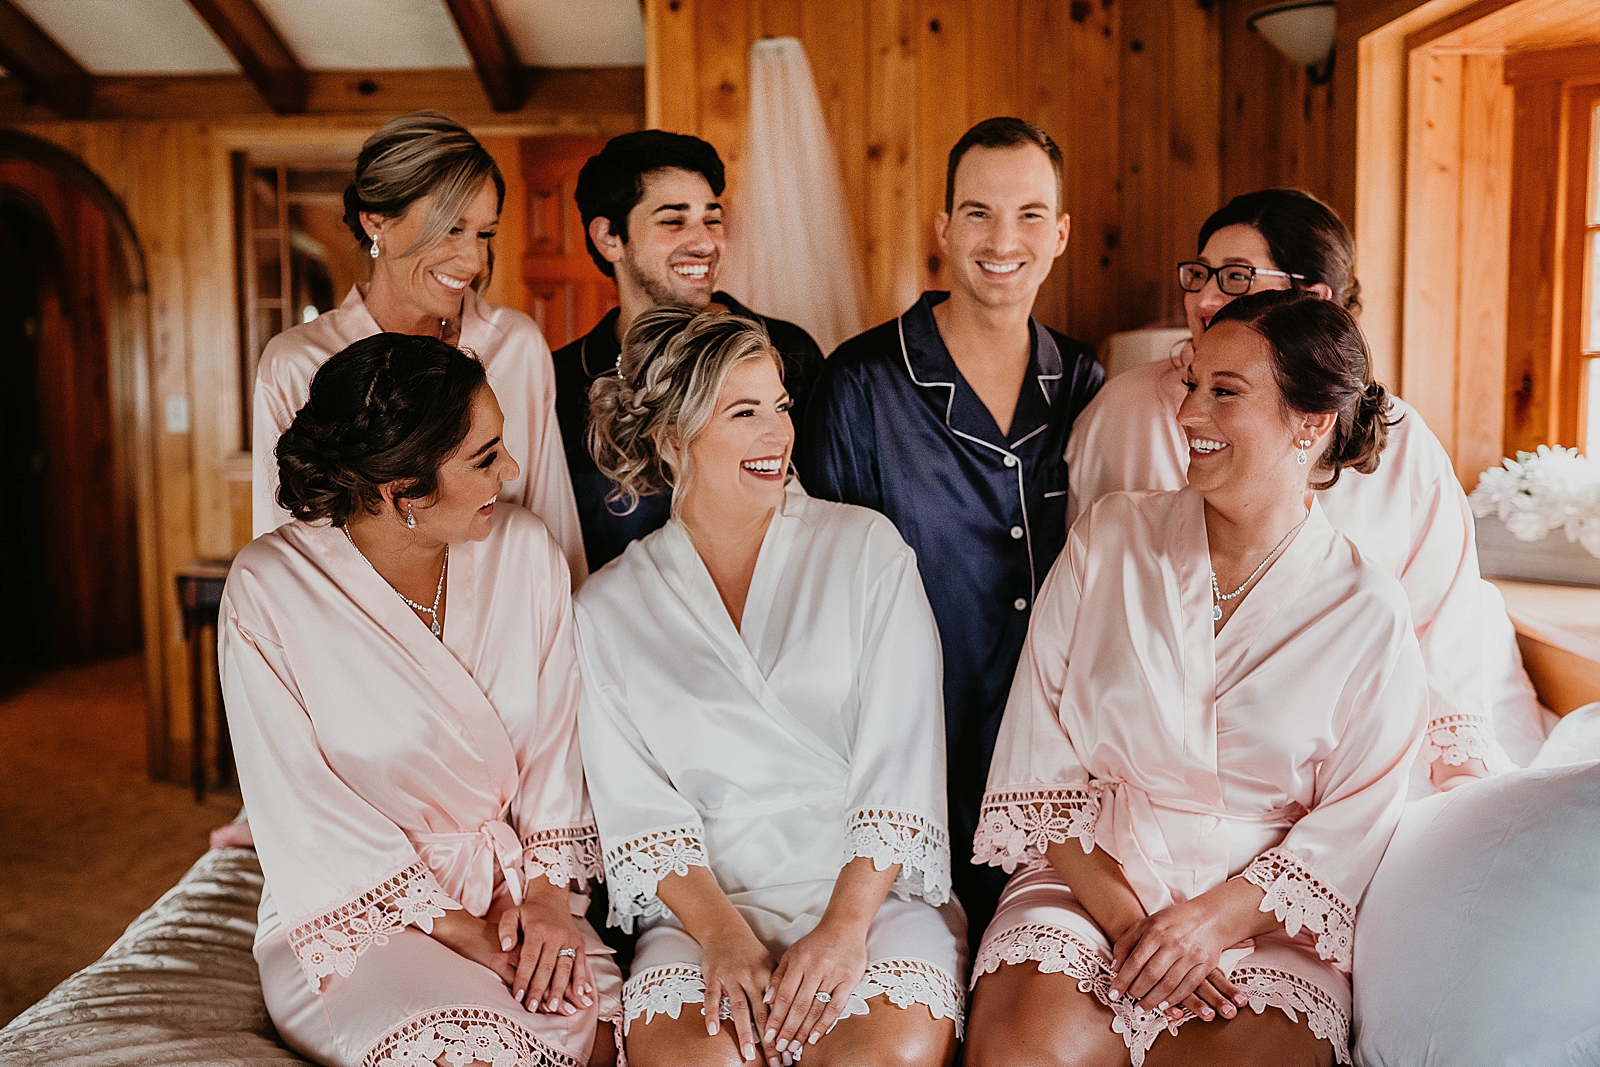 Bride and Bridesmaids together in robes before getting ready